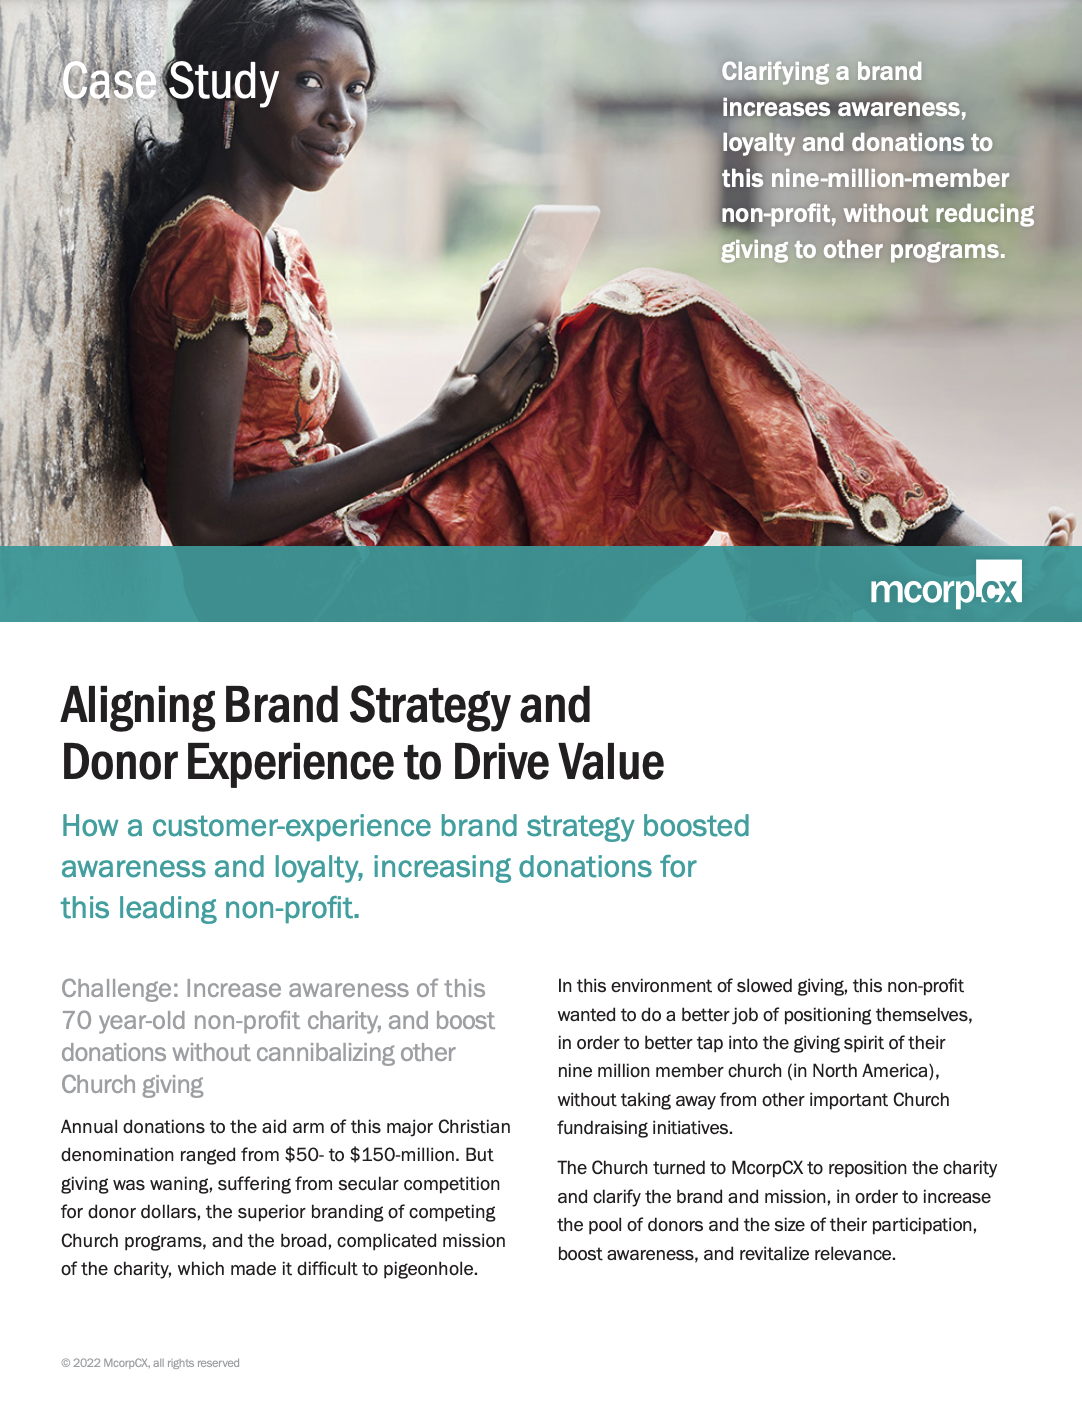 Aligning Brand Strategy and Donor Experience to Drive Value